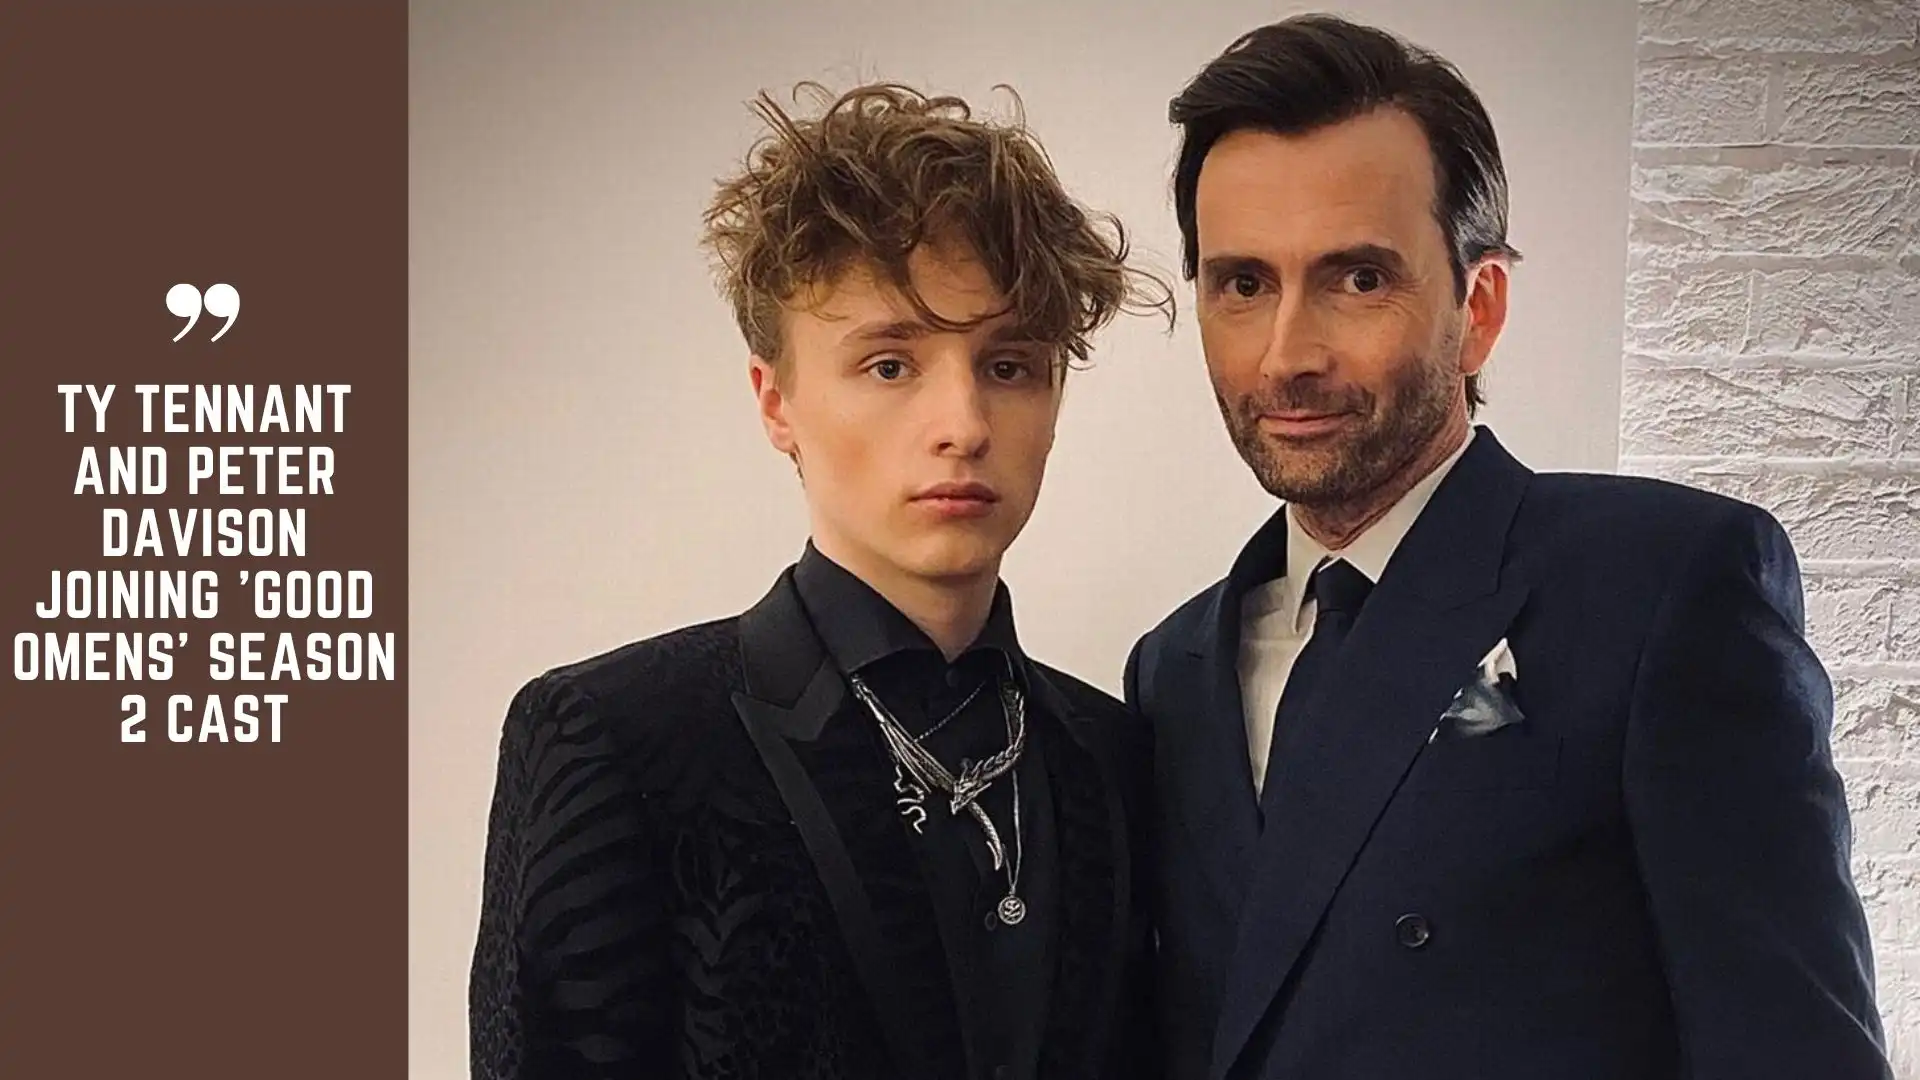 Ty Tennant and Peter Davison joining 'Good Omens' Season 2 Cast (Image credit: mirror.co)